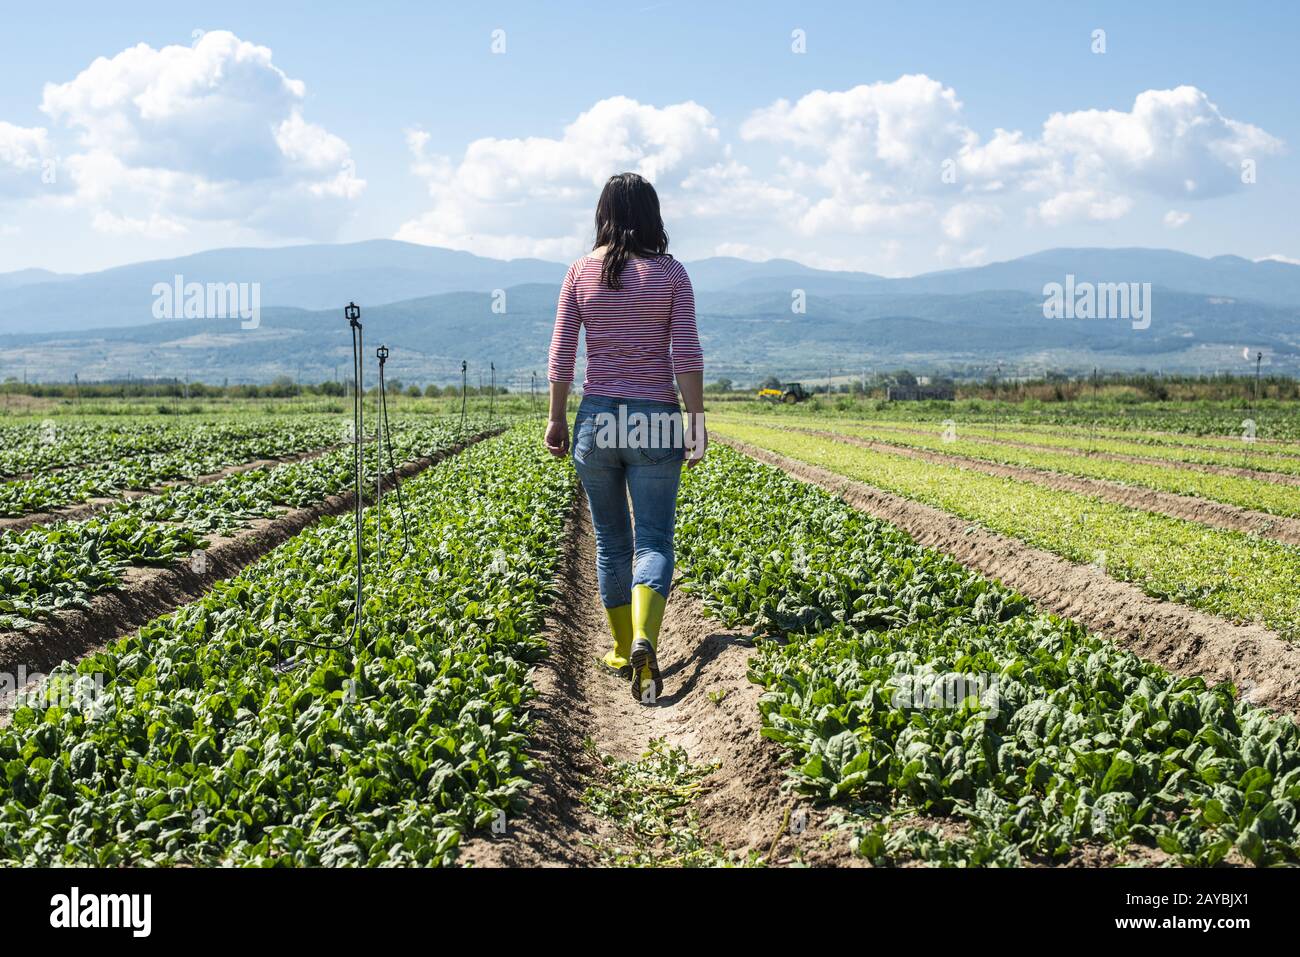 Woman with green boots walking on spinach field. Stock Photo